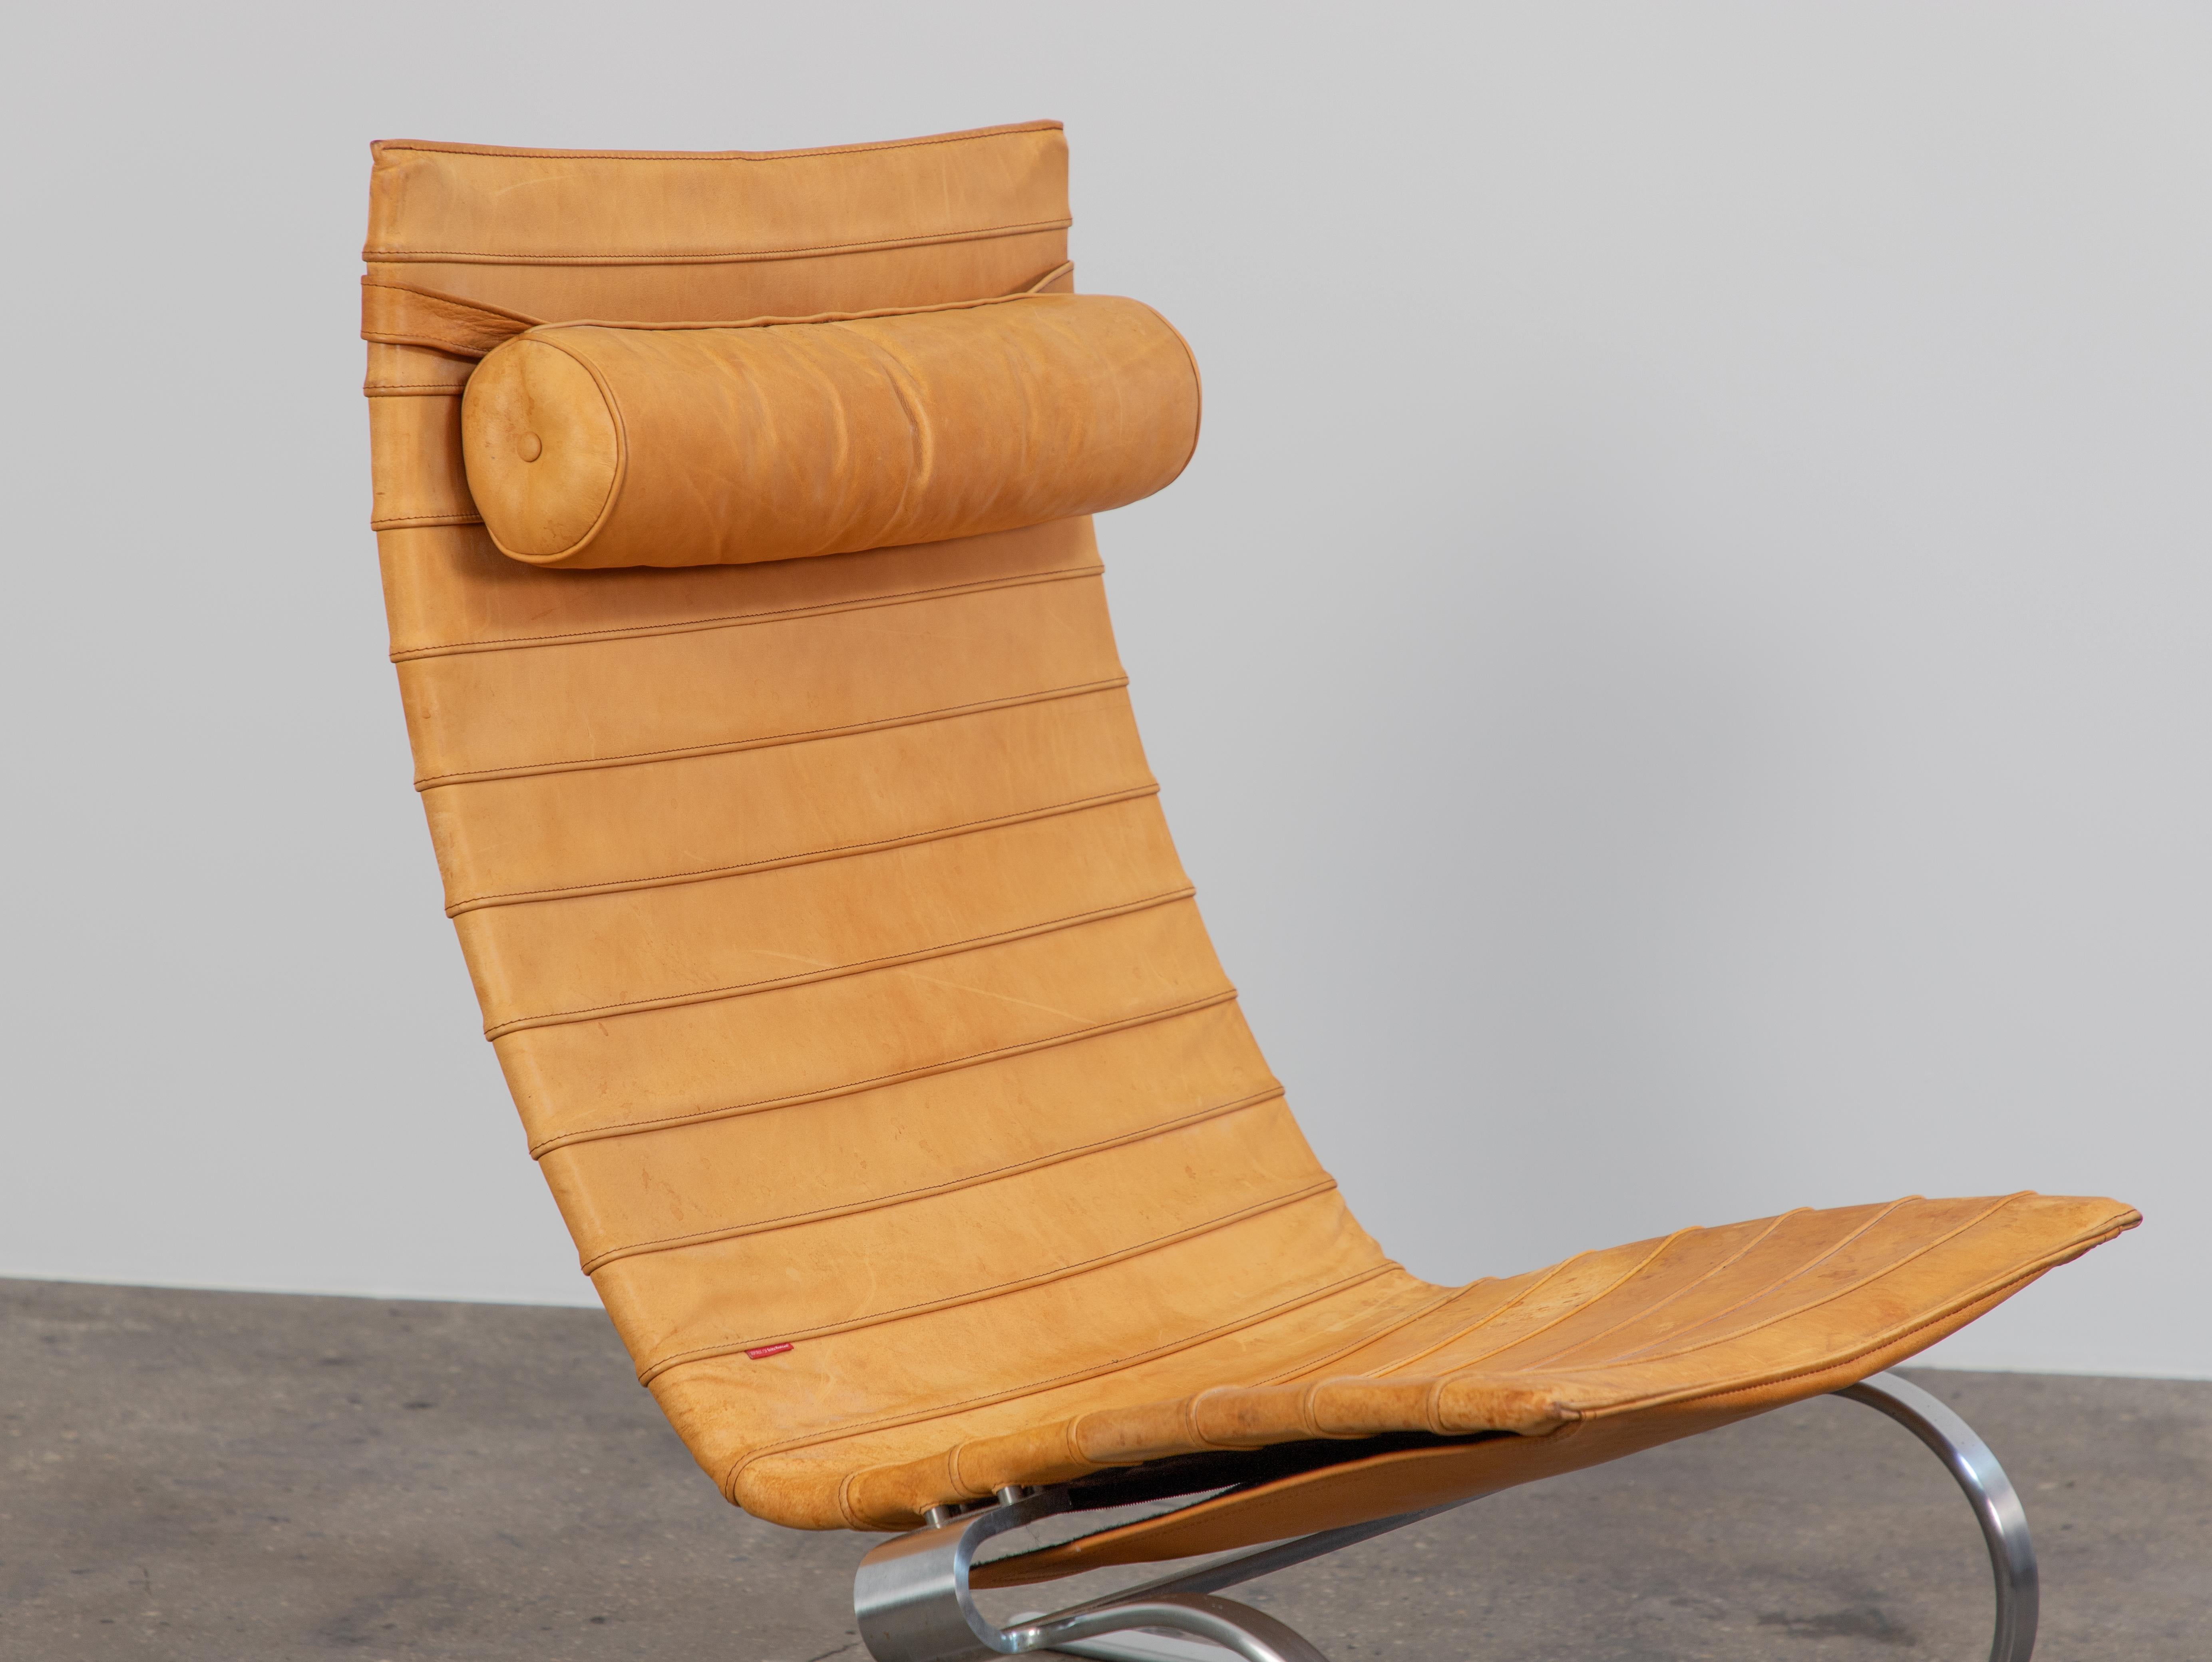 Poul Kjaerholm PK20 Lounge Chair in Cognac Leather In Good Condition For Sale In Brooklyn, NY